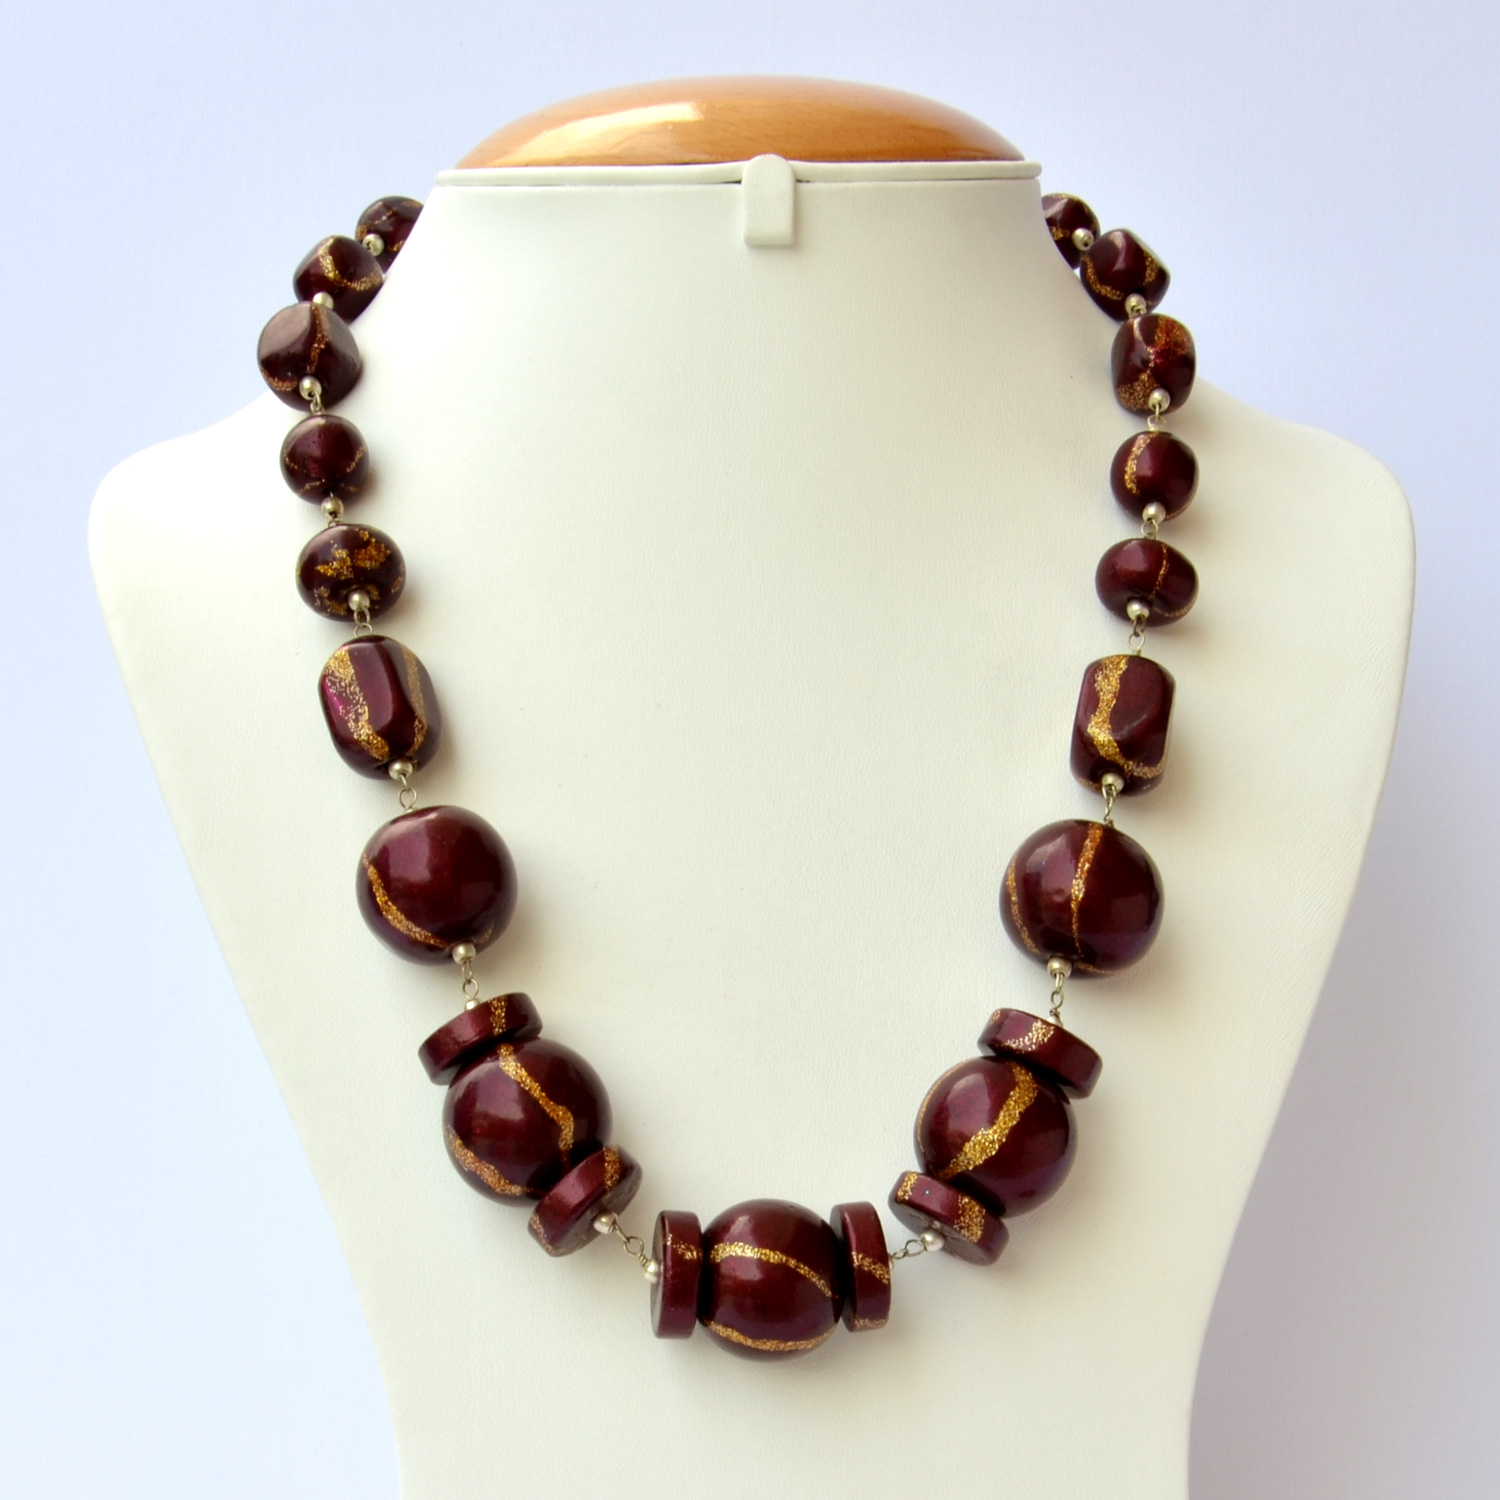 Handmade Necklace with Maroon Beads having Golden Stripes | Maruti Beads